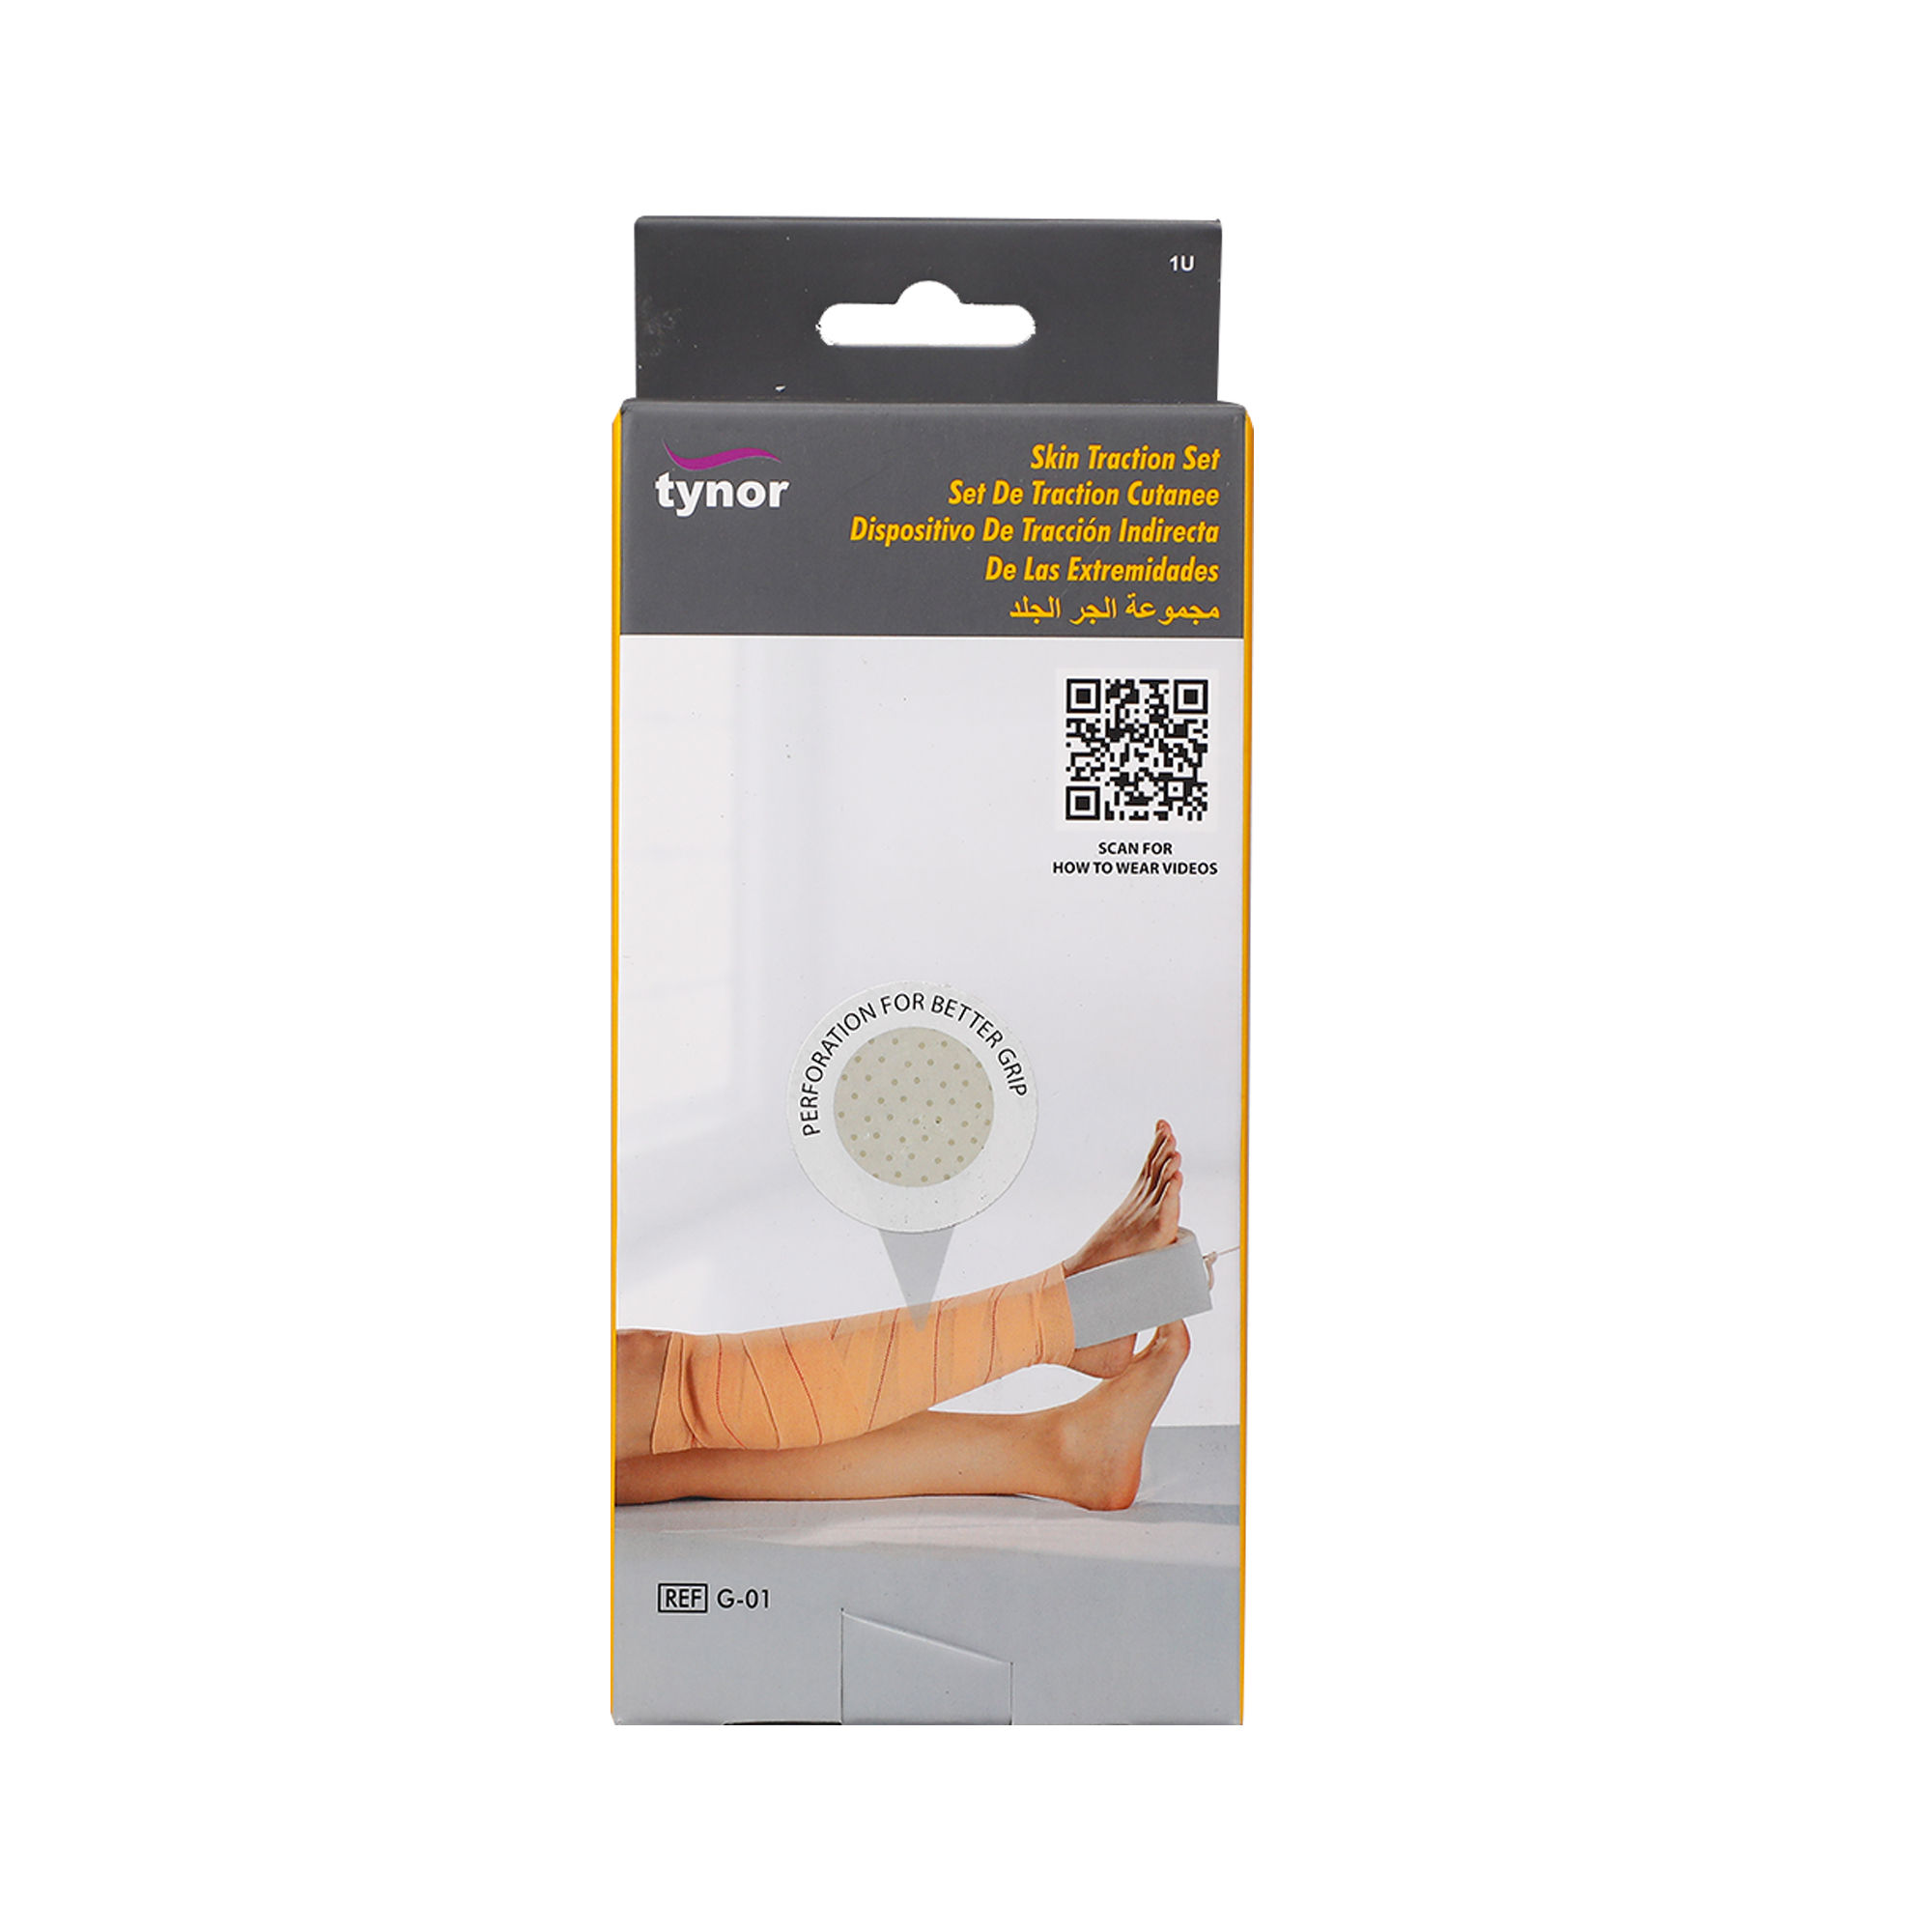 Tynor Skin Traction, 1 Kit, Pack of 1 